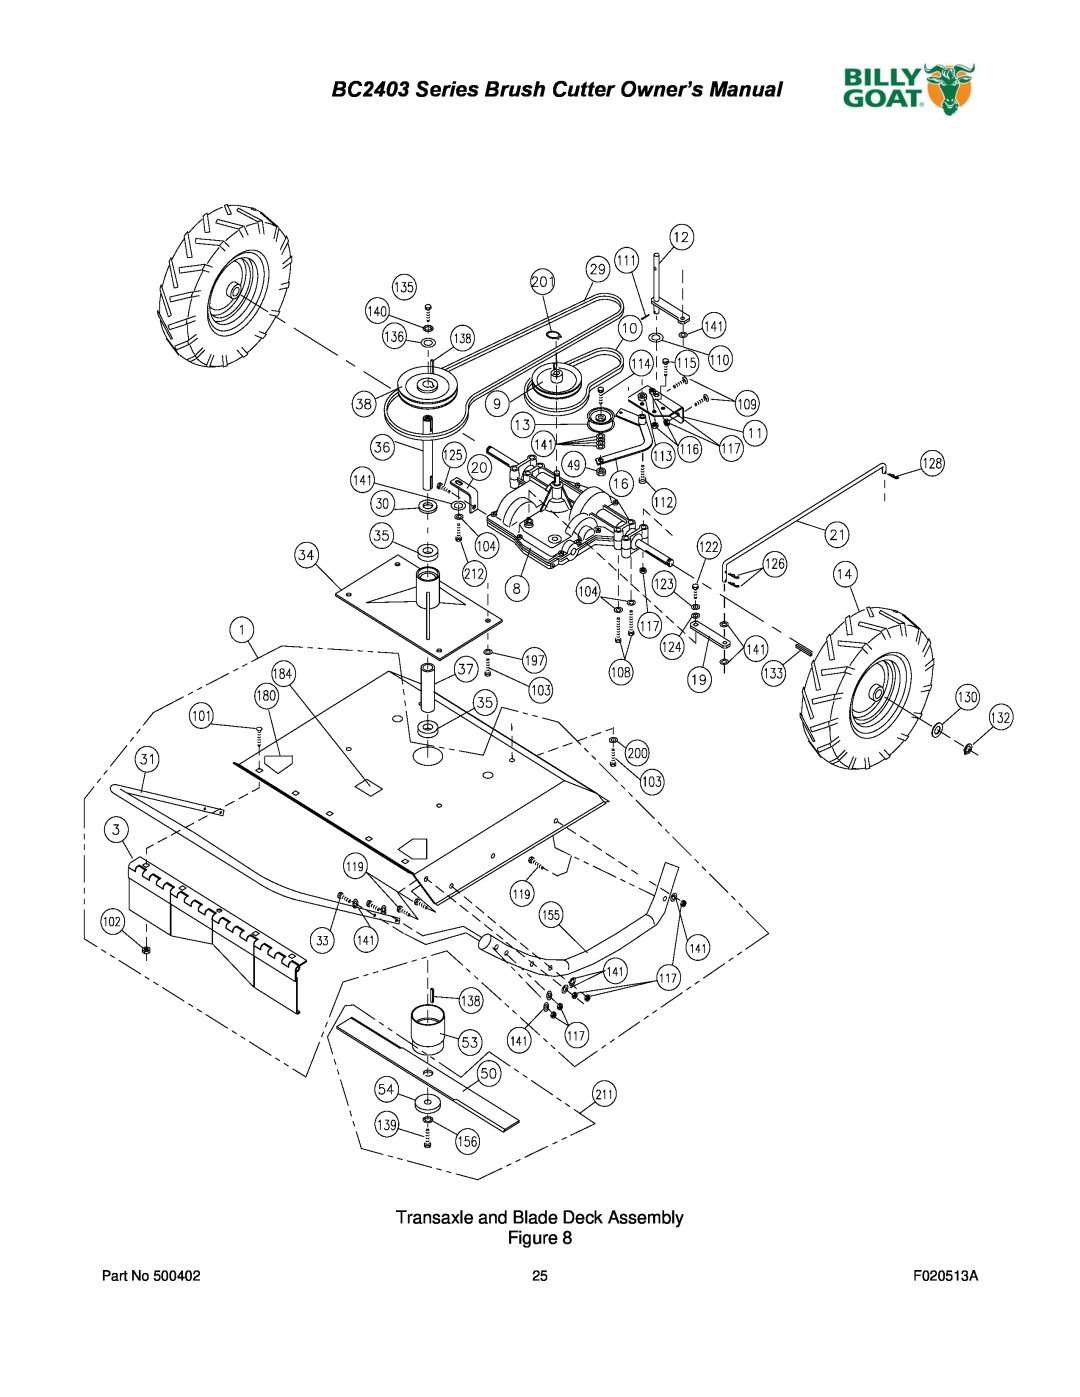 Billy Goat BC2403 owner manual Transaxle and Blade Deck Assembly, F020513A 